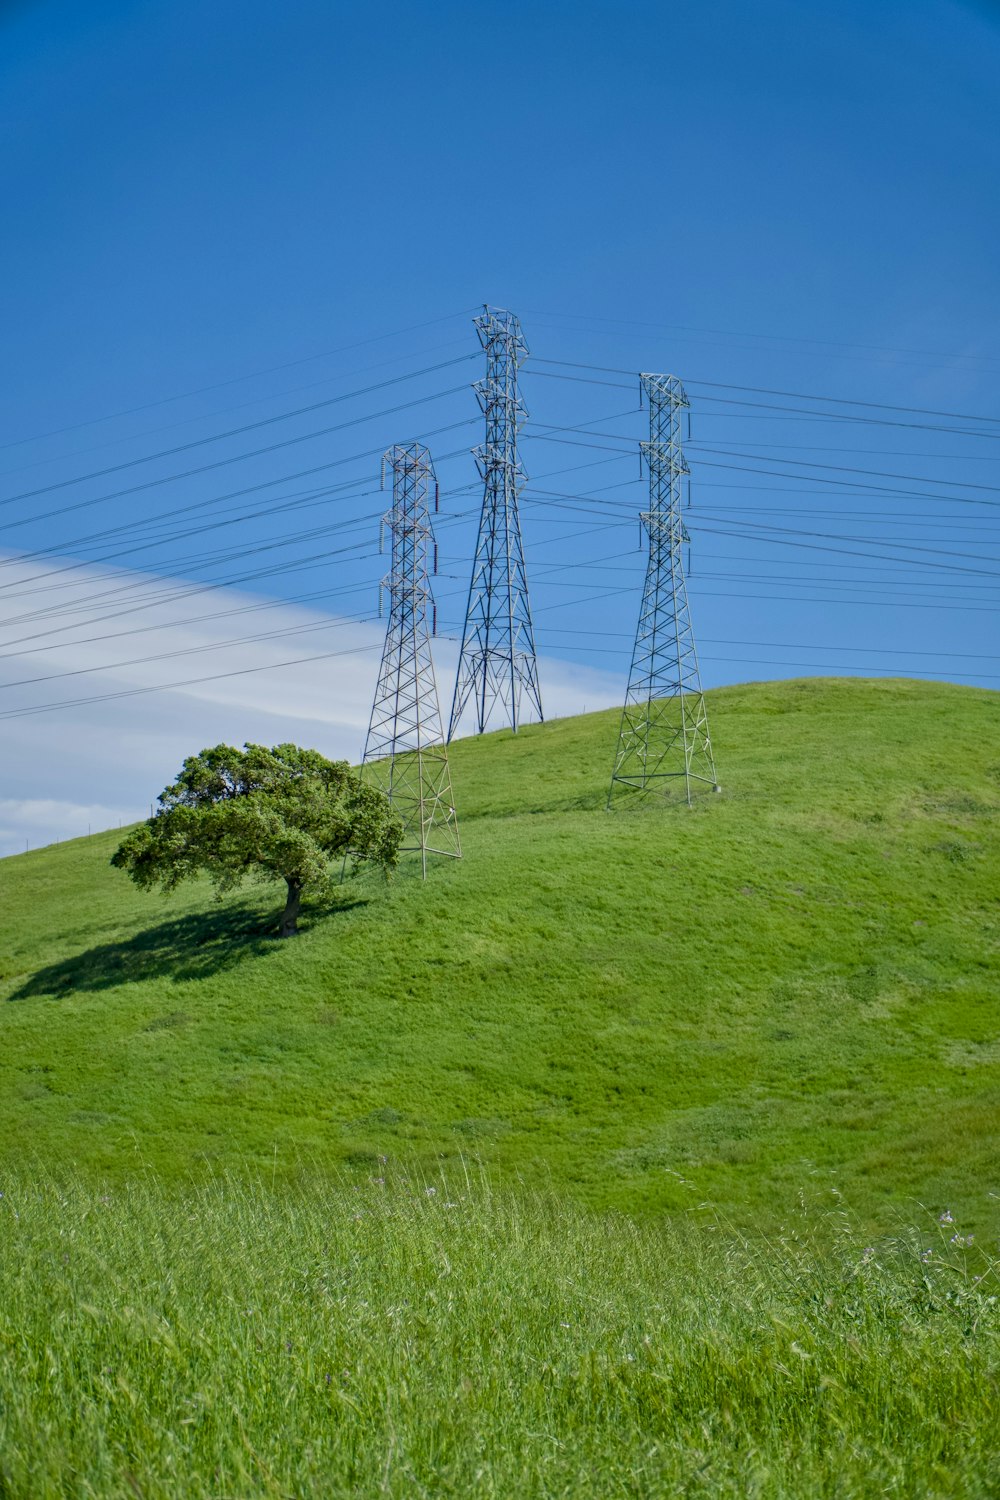 a lone tree on a grassy hill with power lines in the background